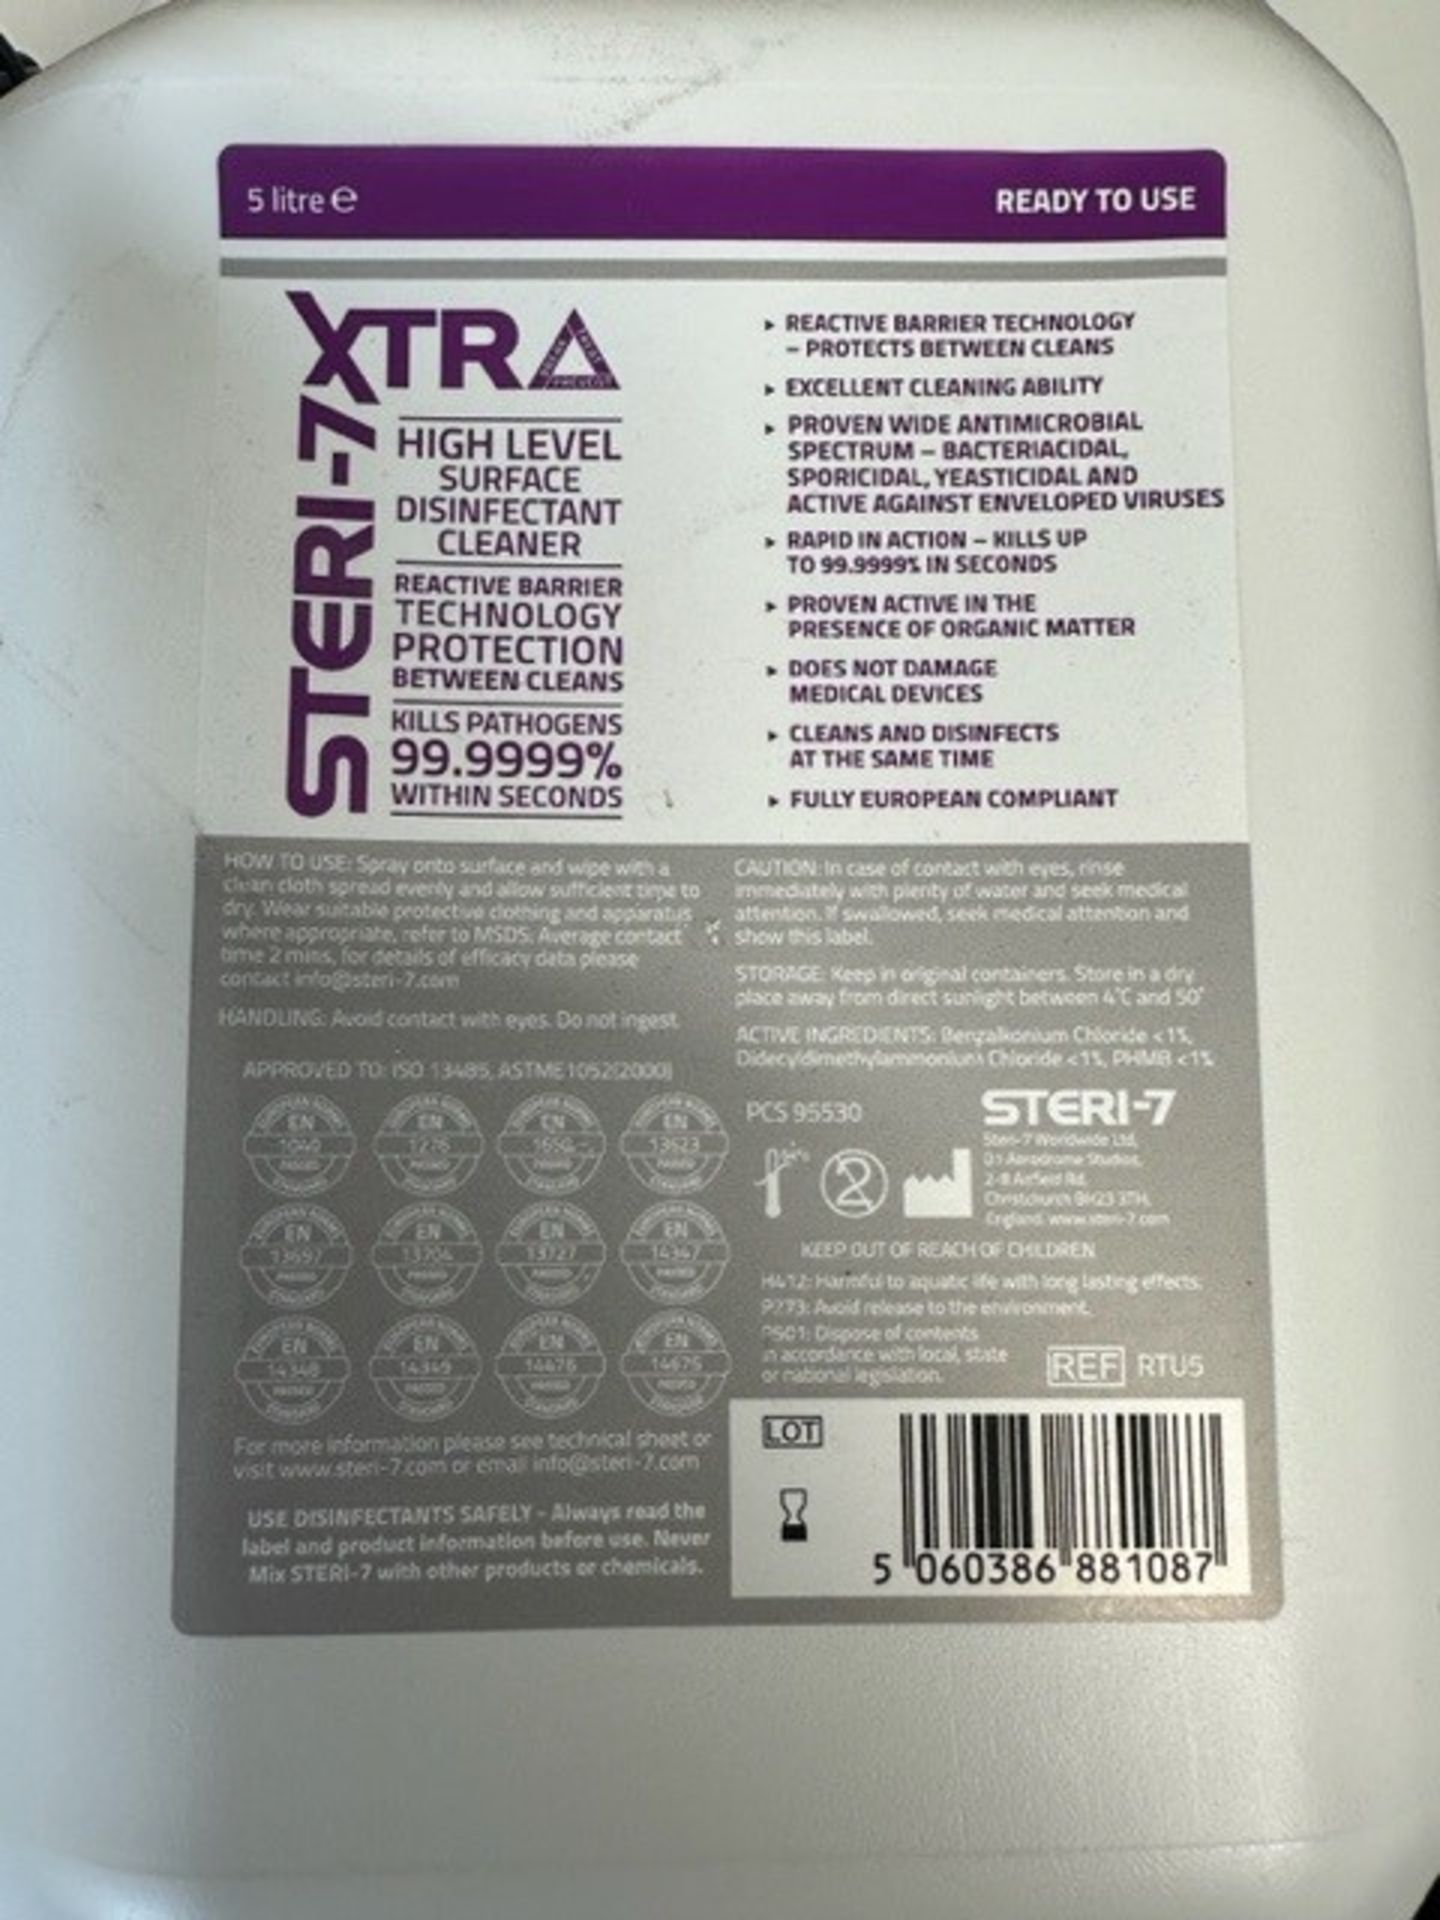 4 x Steri-7 5L Bottles of Xtra High Level Surface Disinfectant Cleaner - Ready to Use (1 outer box) - Image 2 of 12